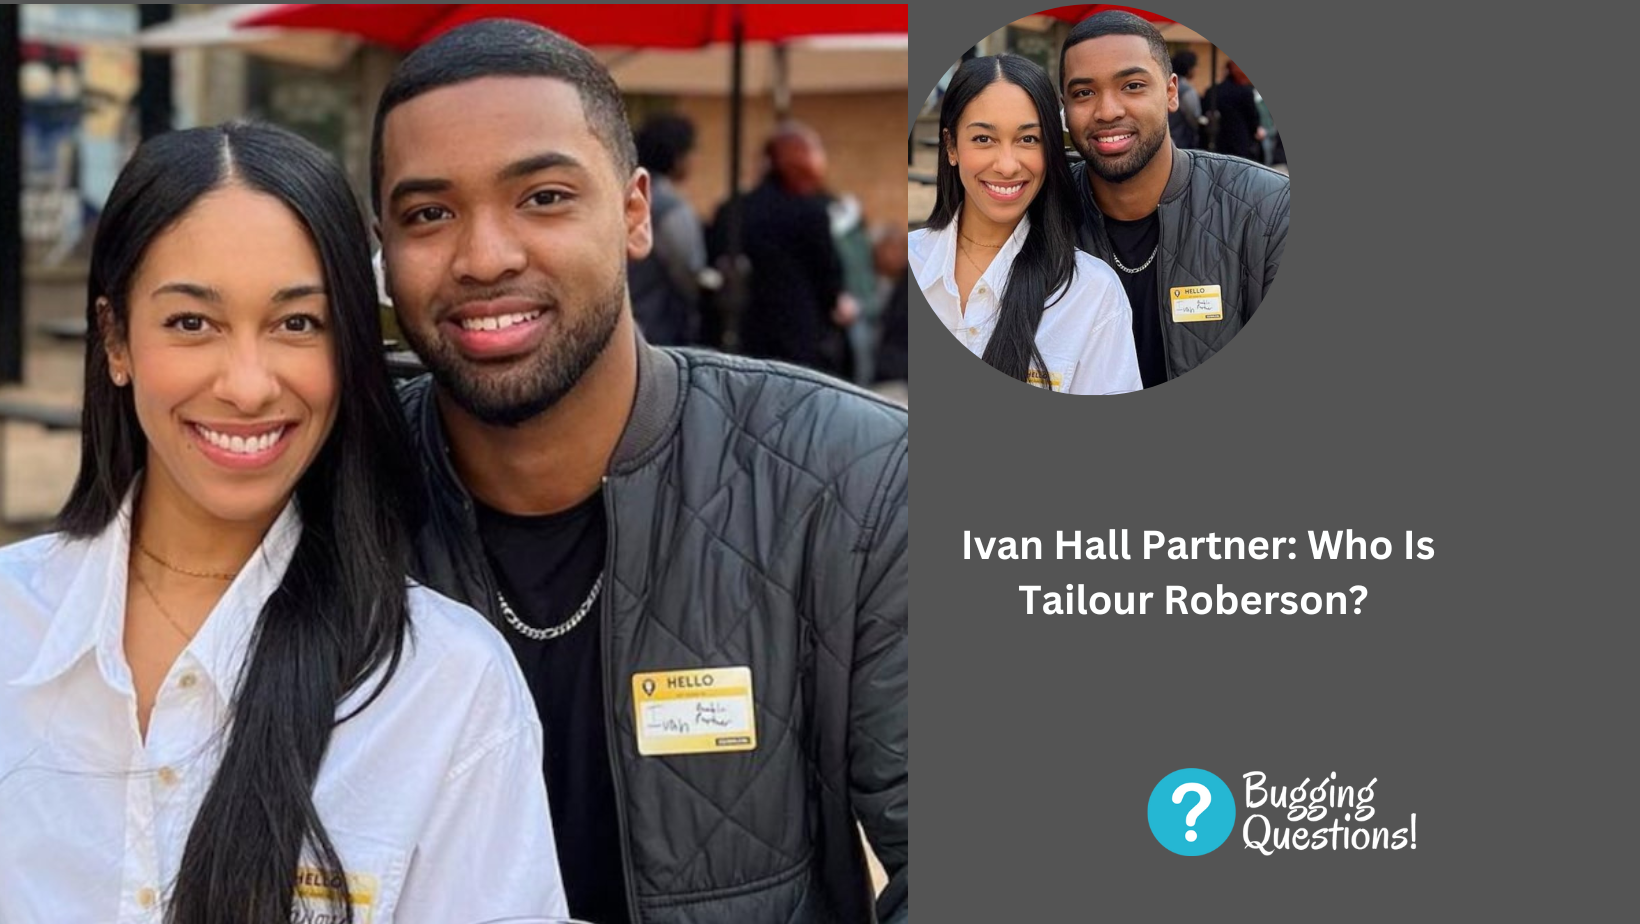 Ivan Hall Partner: Who Is Tailour Roberson? Everything About Their Relationship